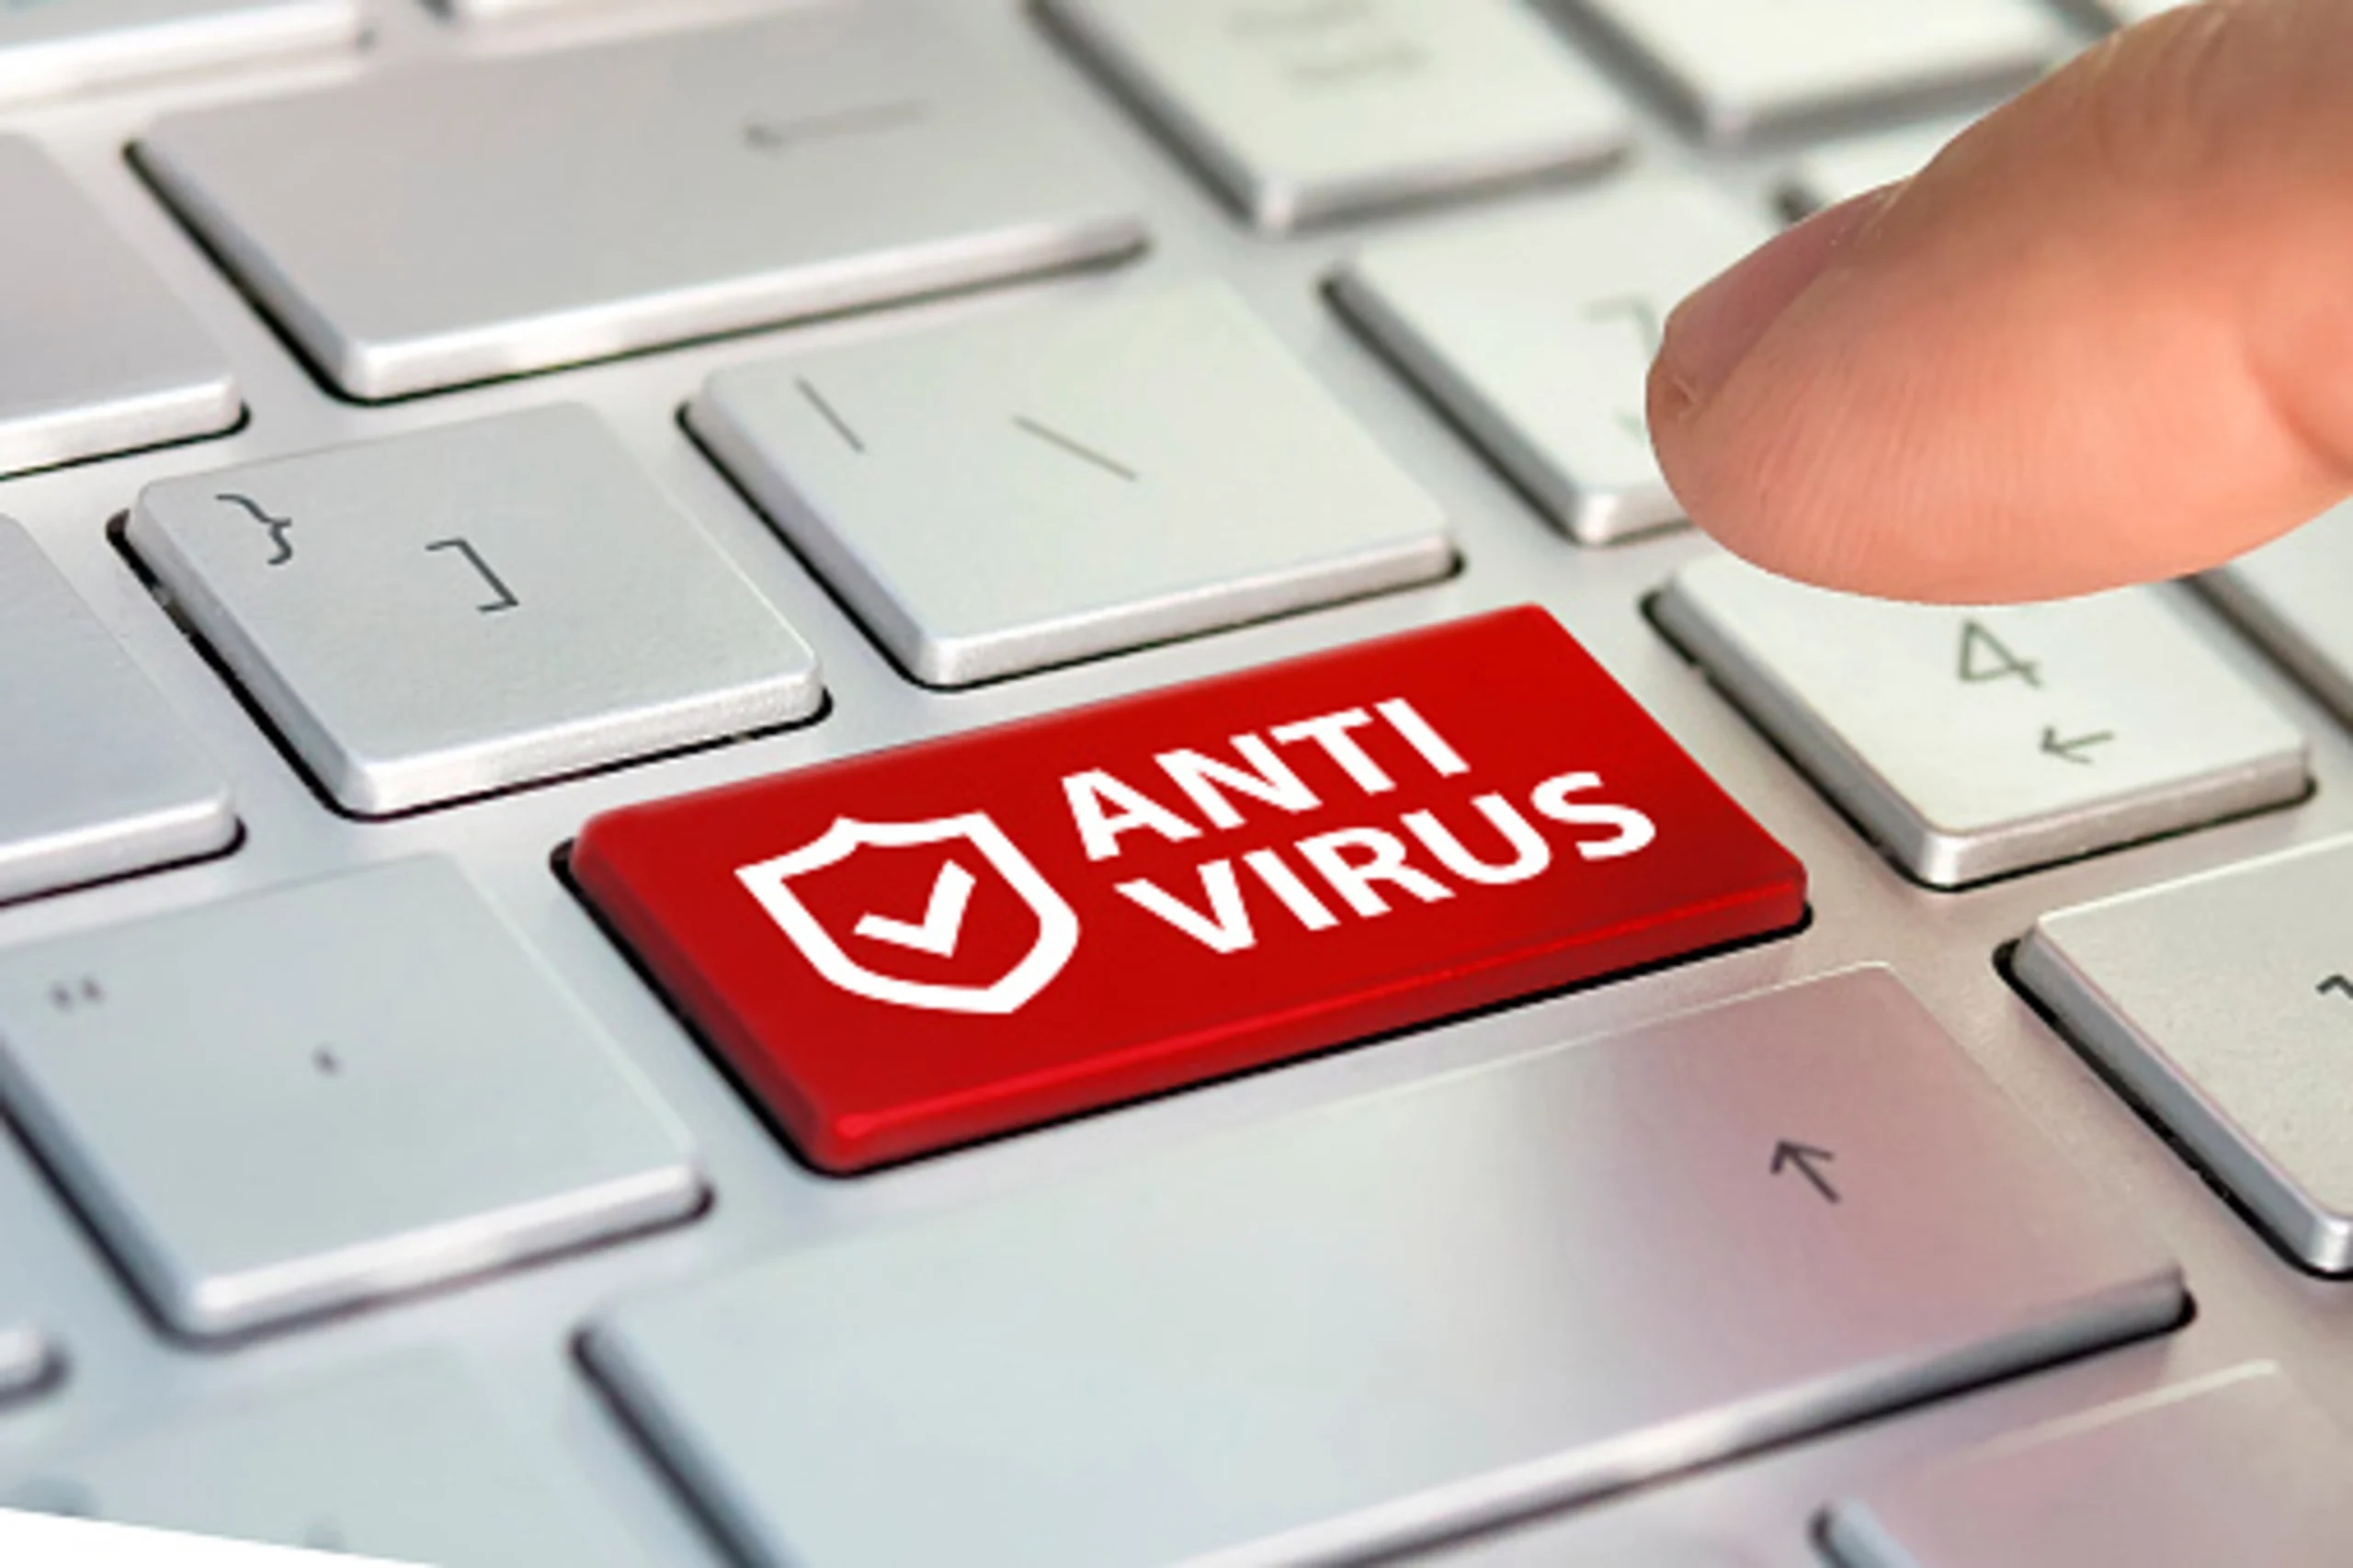 10 Best Antivirus Apps For Android Smartphones You Need To Try in 2022